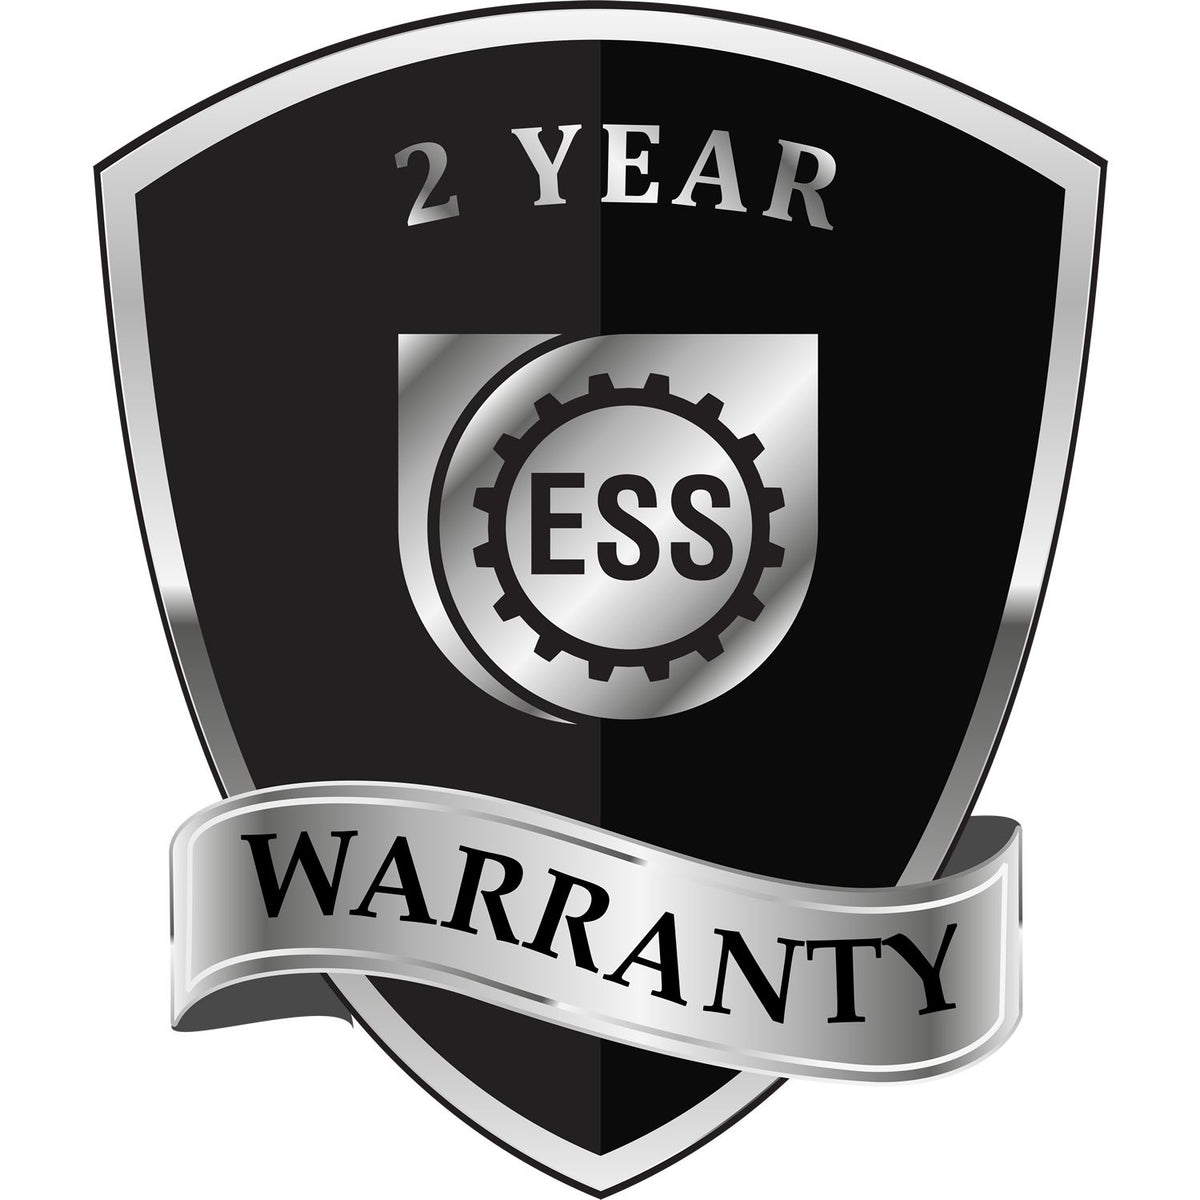 A black and silver badge or emblem showing warranty information for the Heavy Duty Cast Iron Oklahoma Geologist Seal Embosser